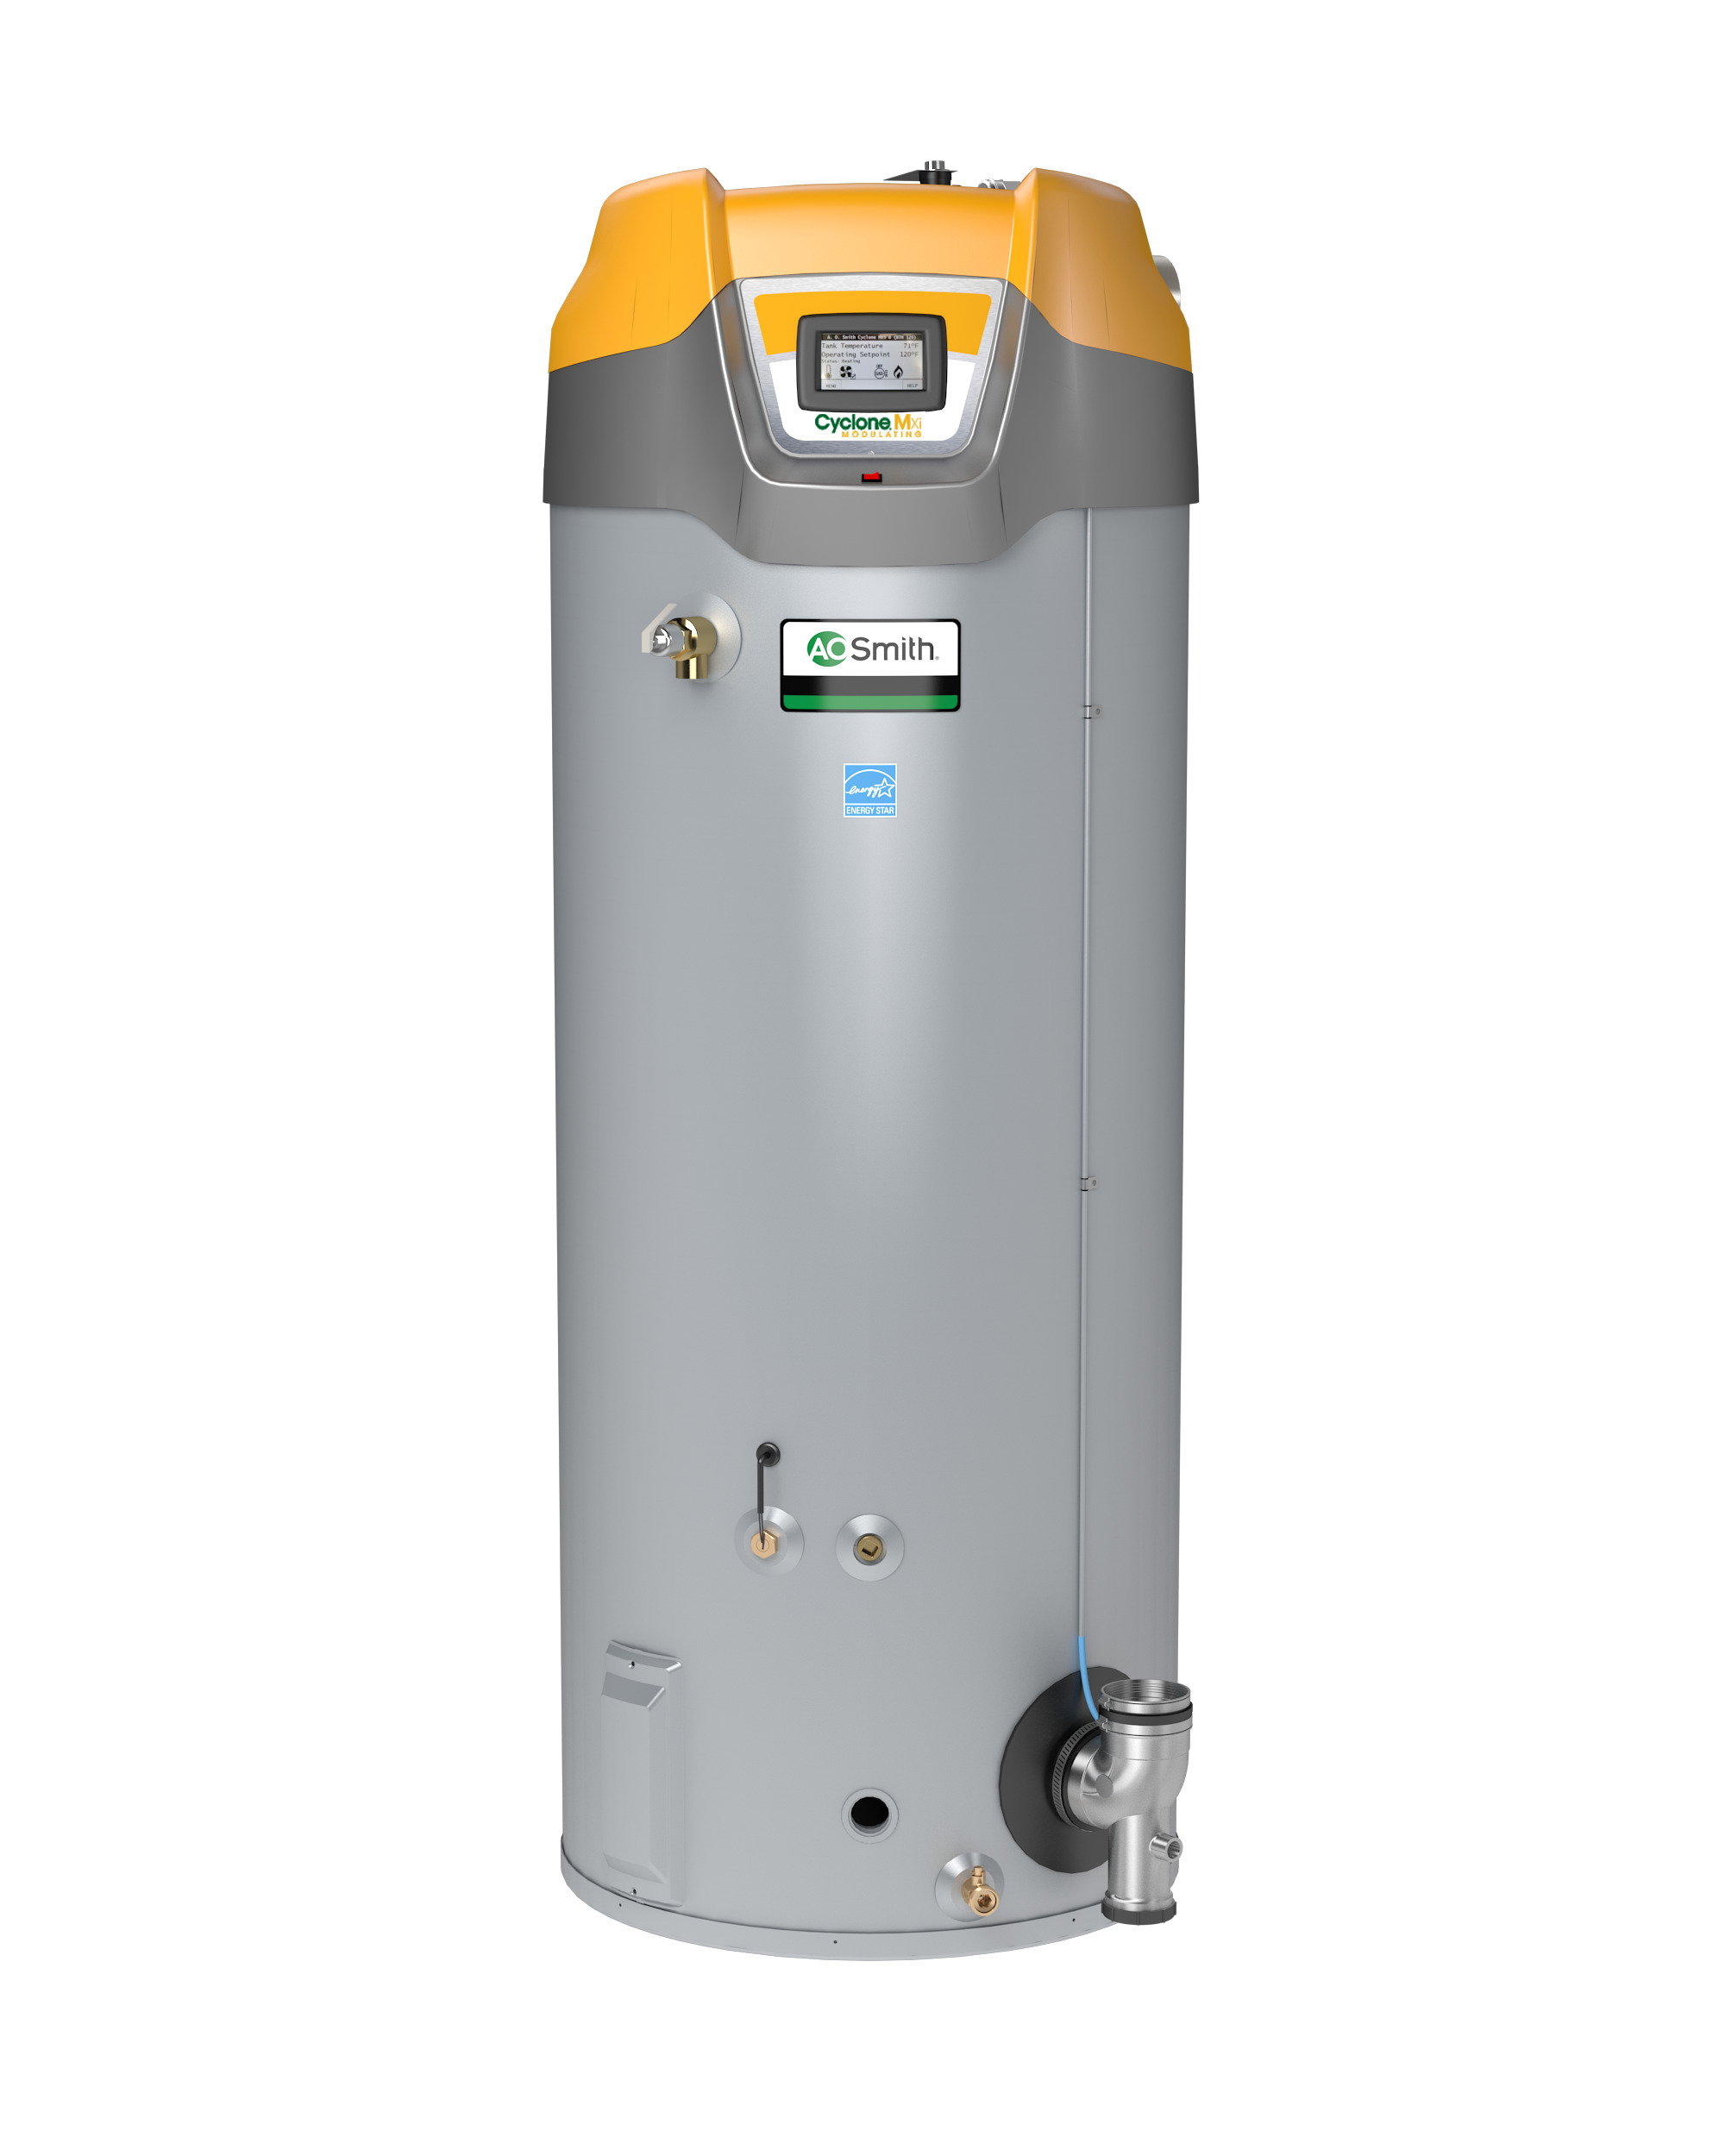 AO SMITH BTX-100-LP: 50 GALLON, 100,000 BTU, 96% THERMAL EFFICIENCY, 2" OR 3" POWER DIRECT VENT, LP (LIQUID PROPANE) CYCLONE Xi MODULATING COMMERCIAL GAS WATER HEATER, Certified from sea level to 10,100'.